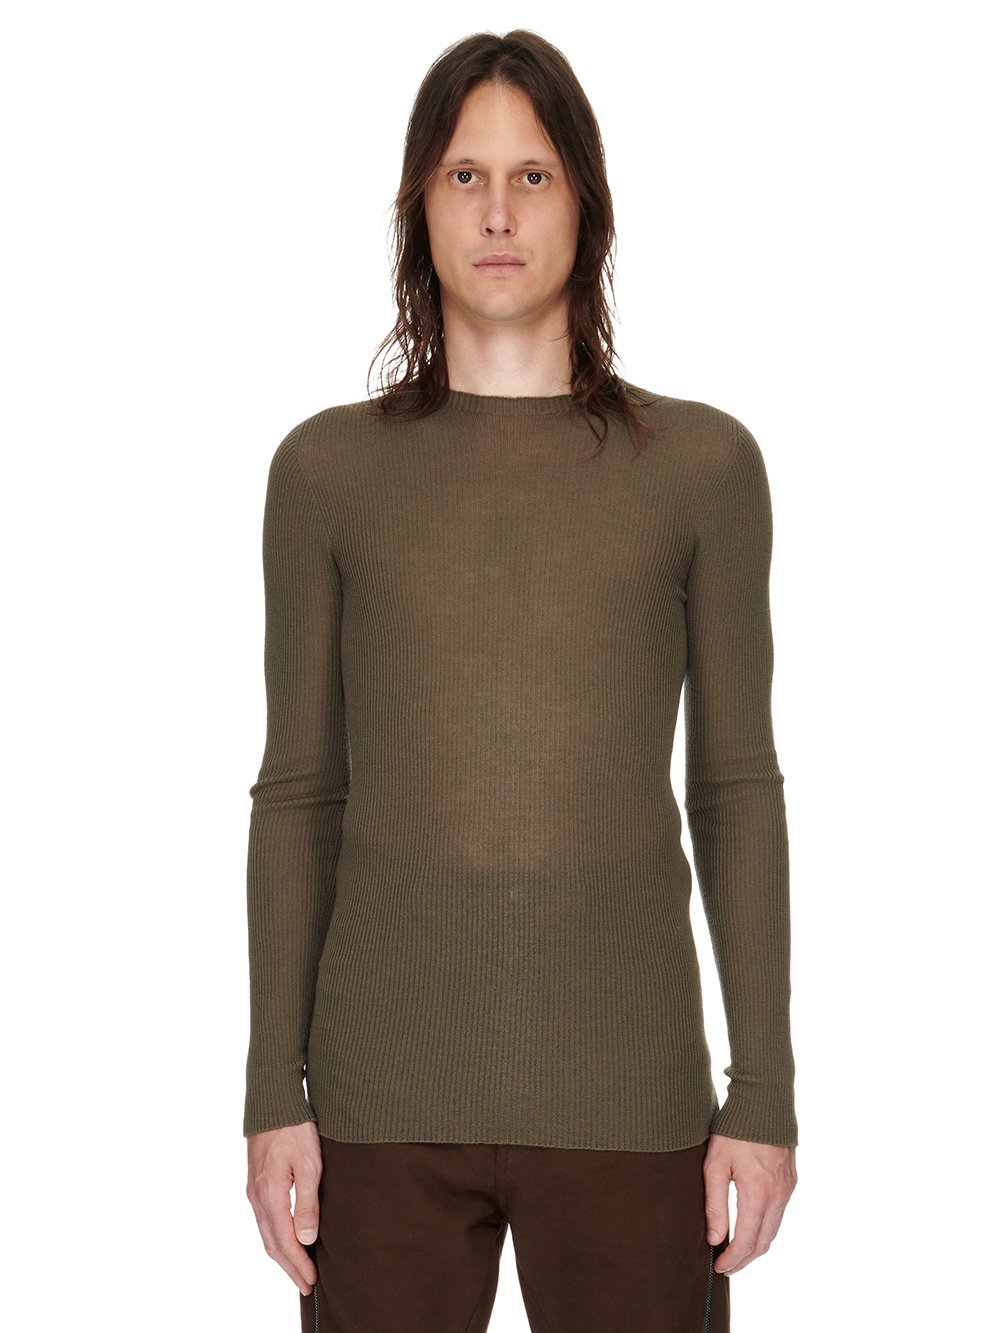 RICK OWENS FW23 LUXOR RIBBED ROUND NECK IN DUST GREY LIGHTWEIGHT RIBBED KNIT